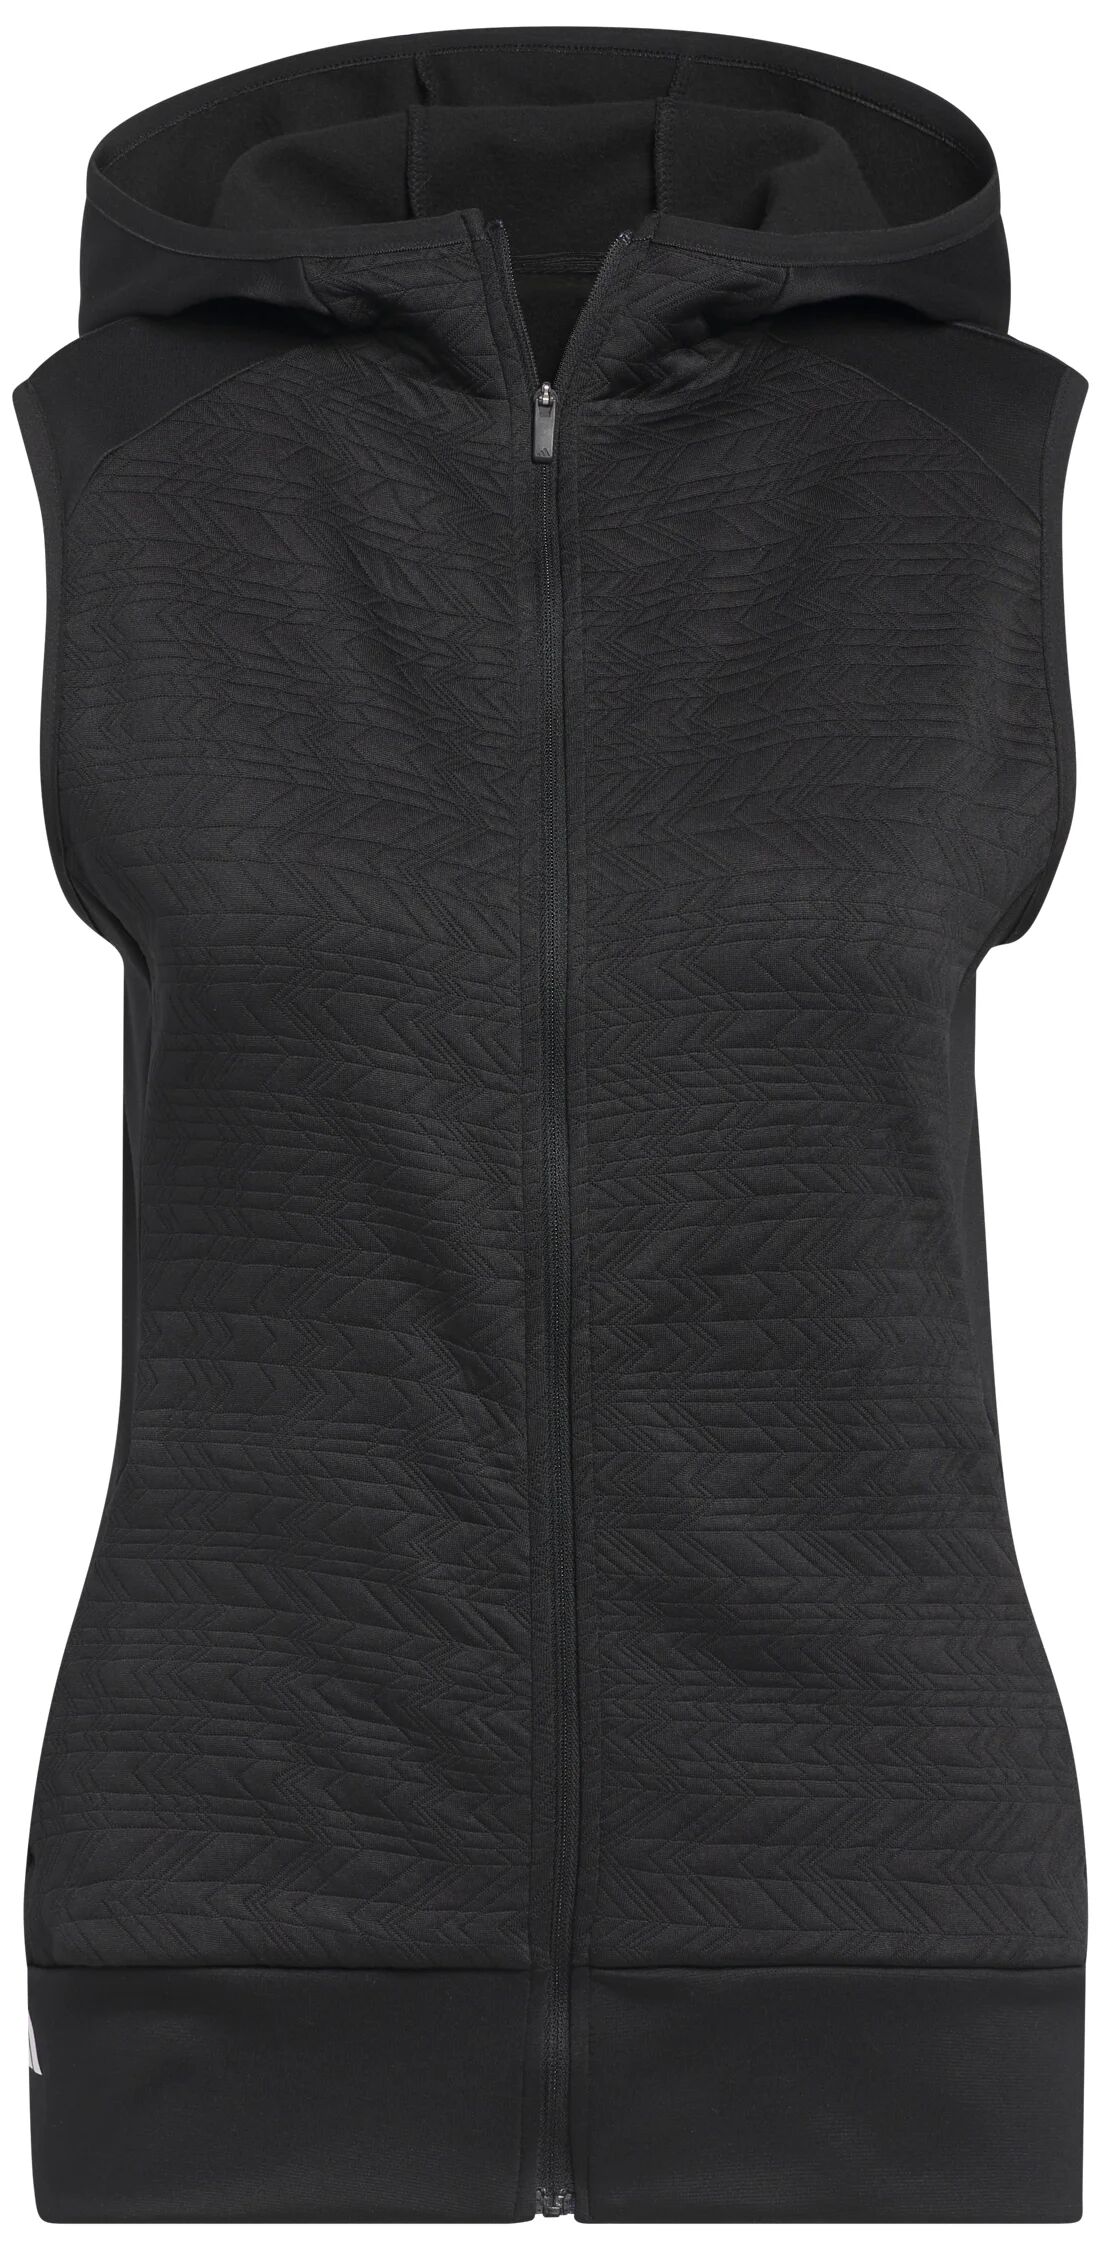 adidas Womens COLD.RDY Full-Zip Golf Vest - Black, Size: Small